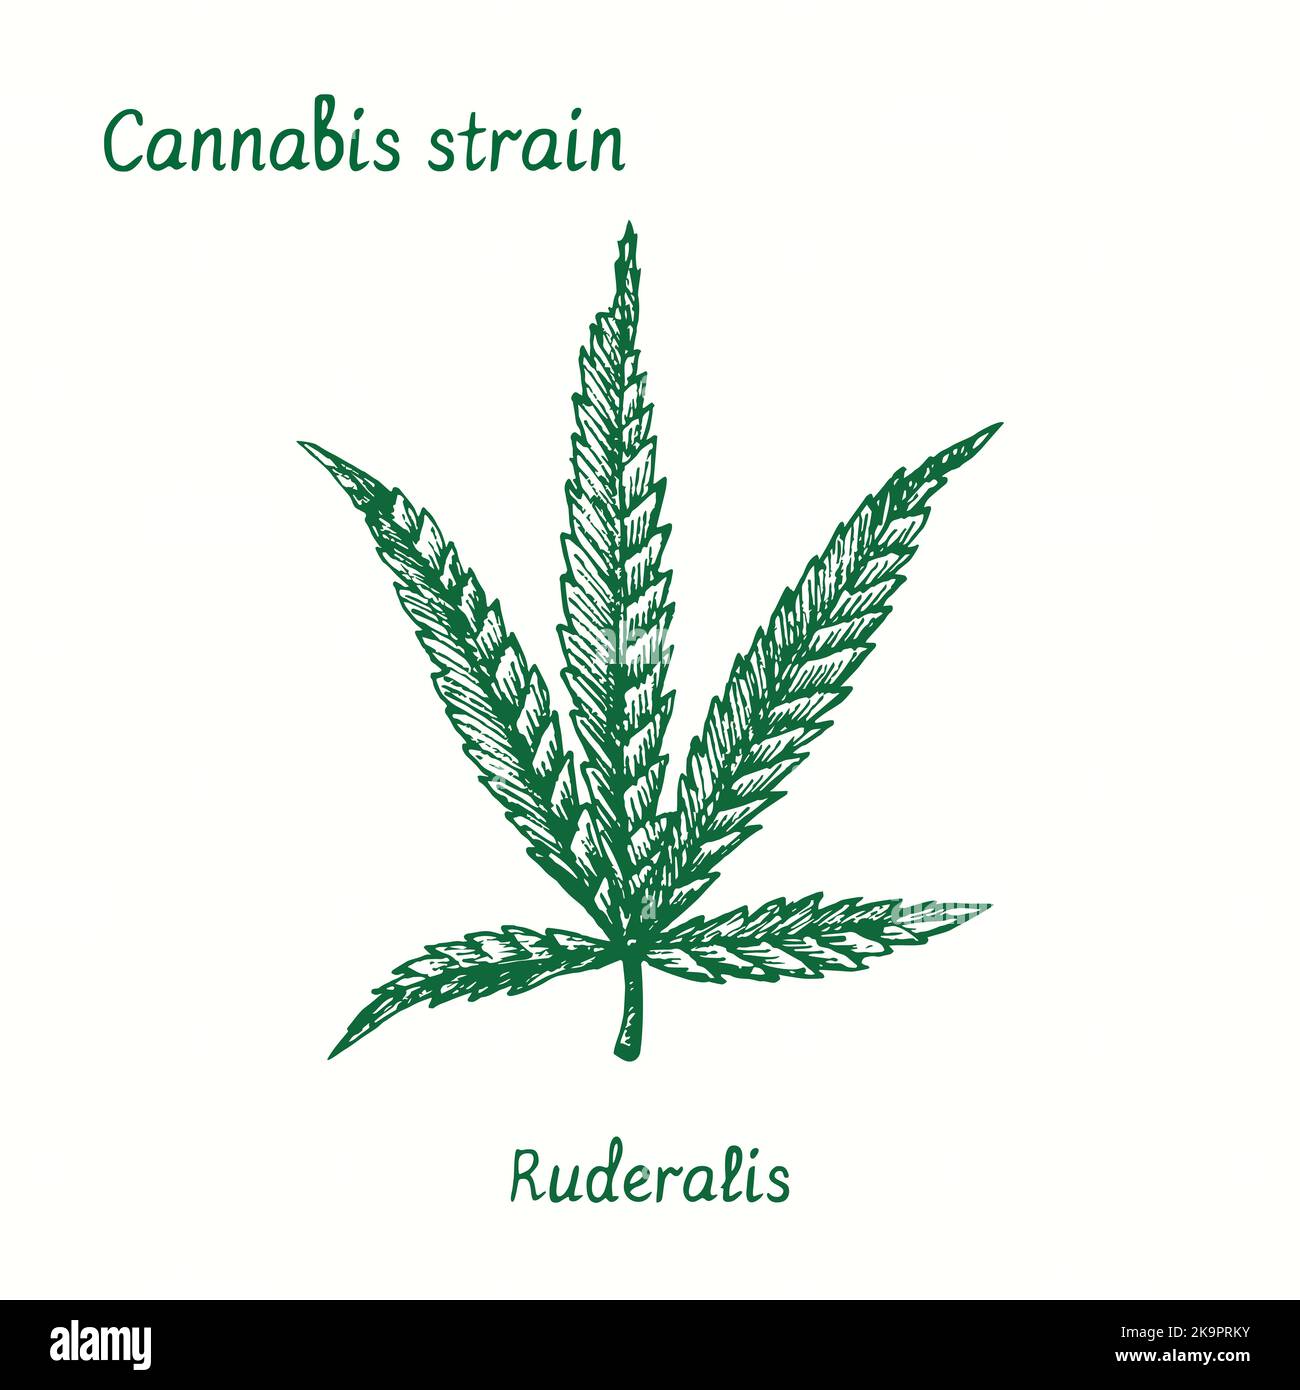 Cannabis strain. Ruderalis. Ink black and white doodle drawing. Stock Photo